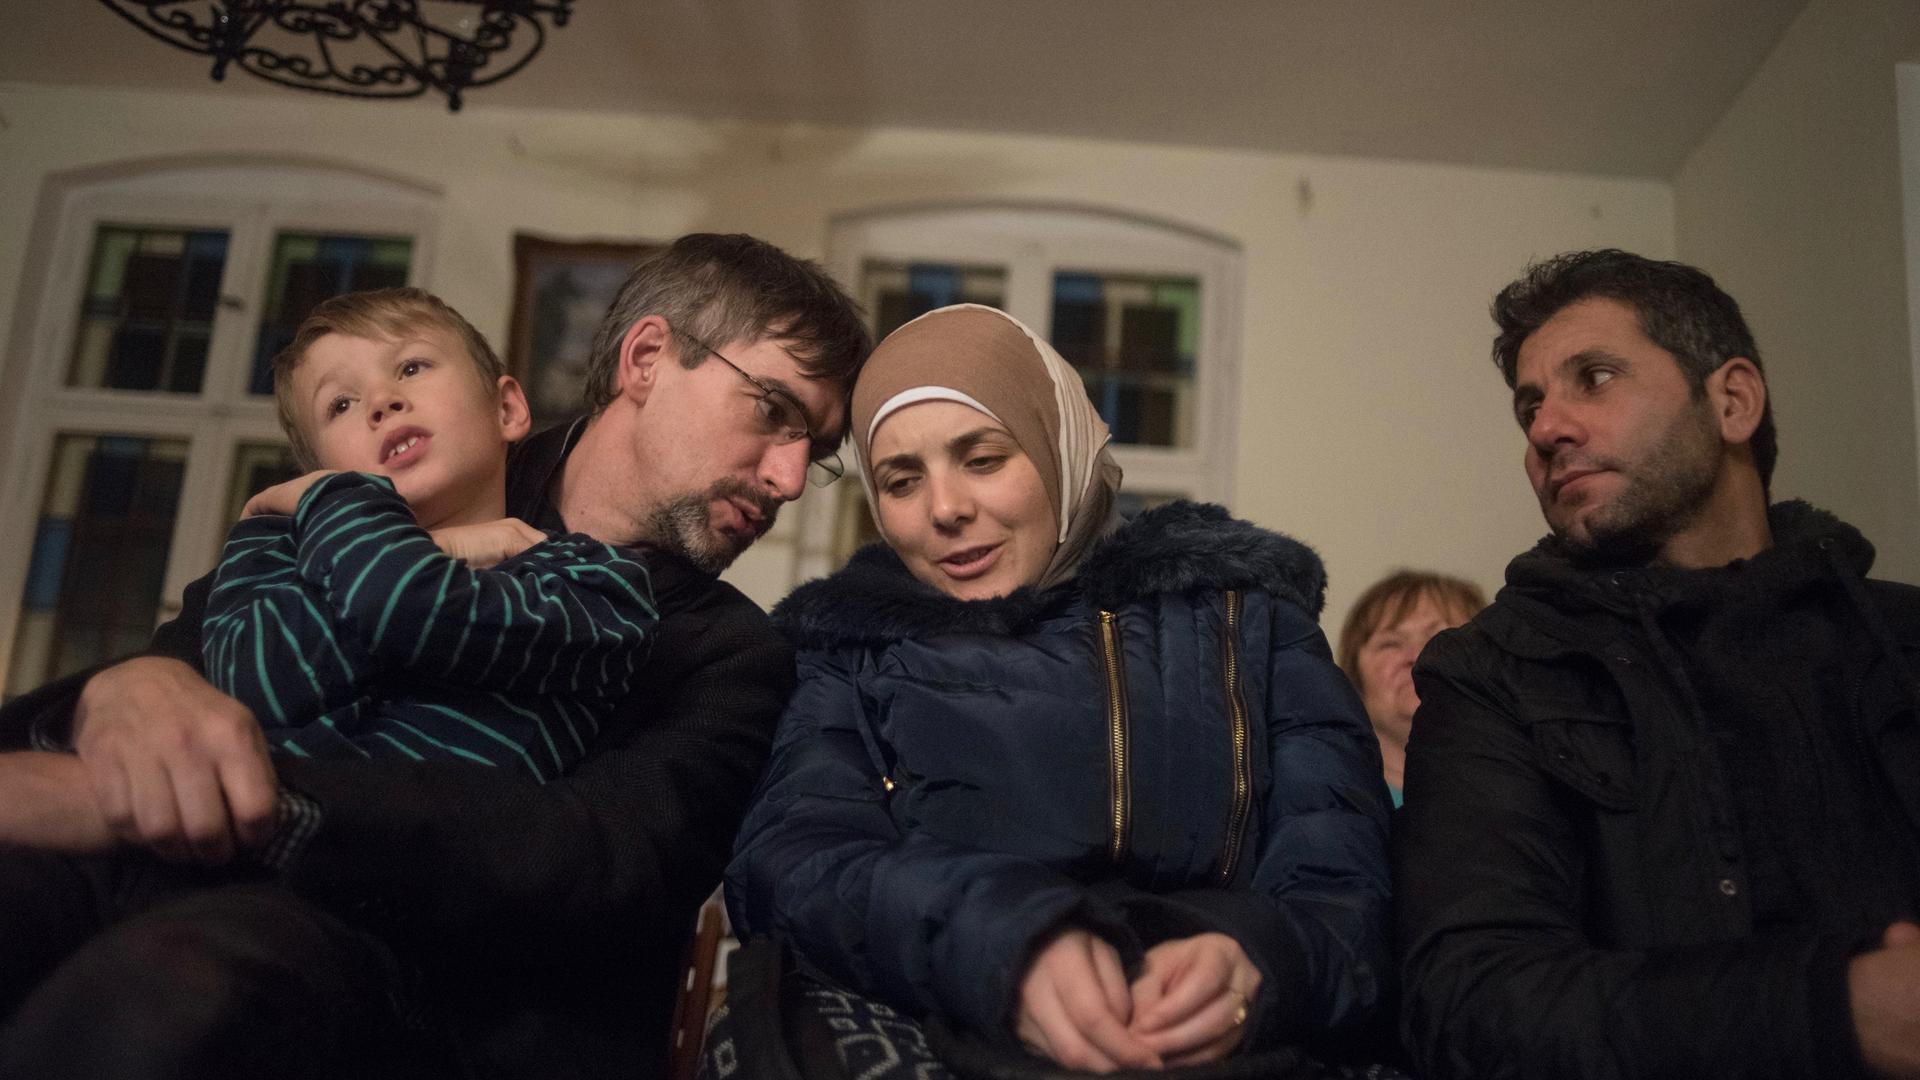 Golzow mayor Frank Schütz, left, leans over to whisper a question to Rasha Haimoud during a holiday concert. She and her husband, Ahmad Haimoud, are refugees who settled in the small former East German town after escaping the war in their native Syria